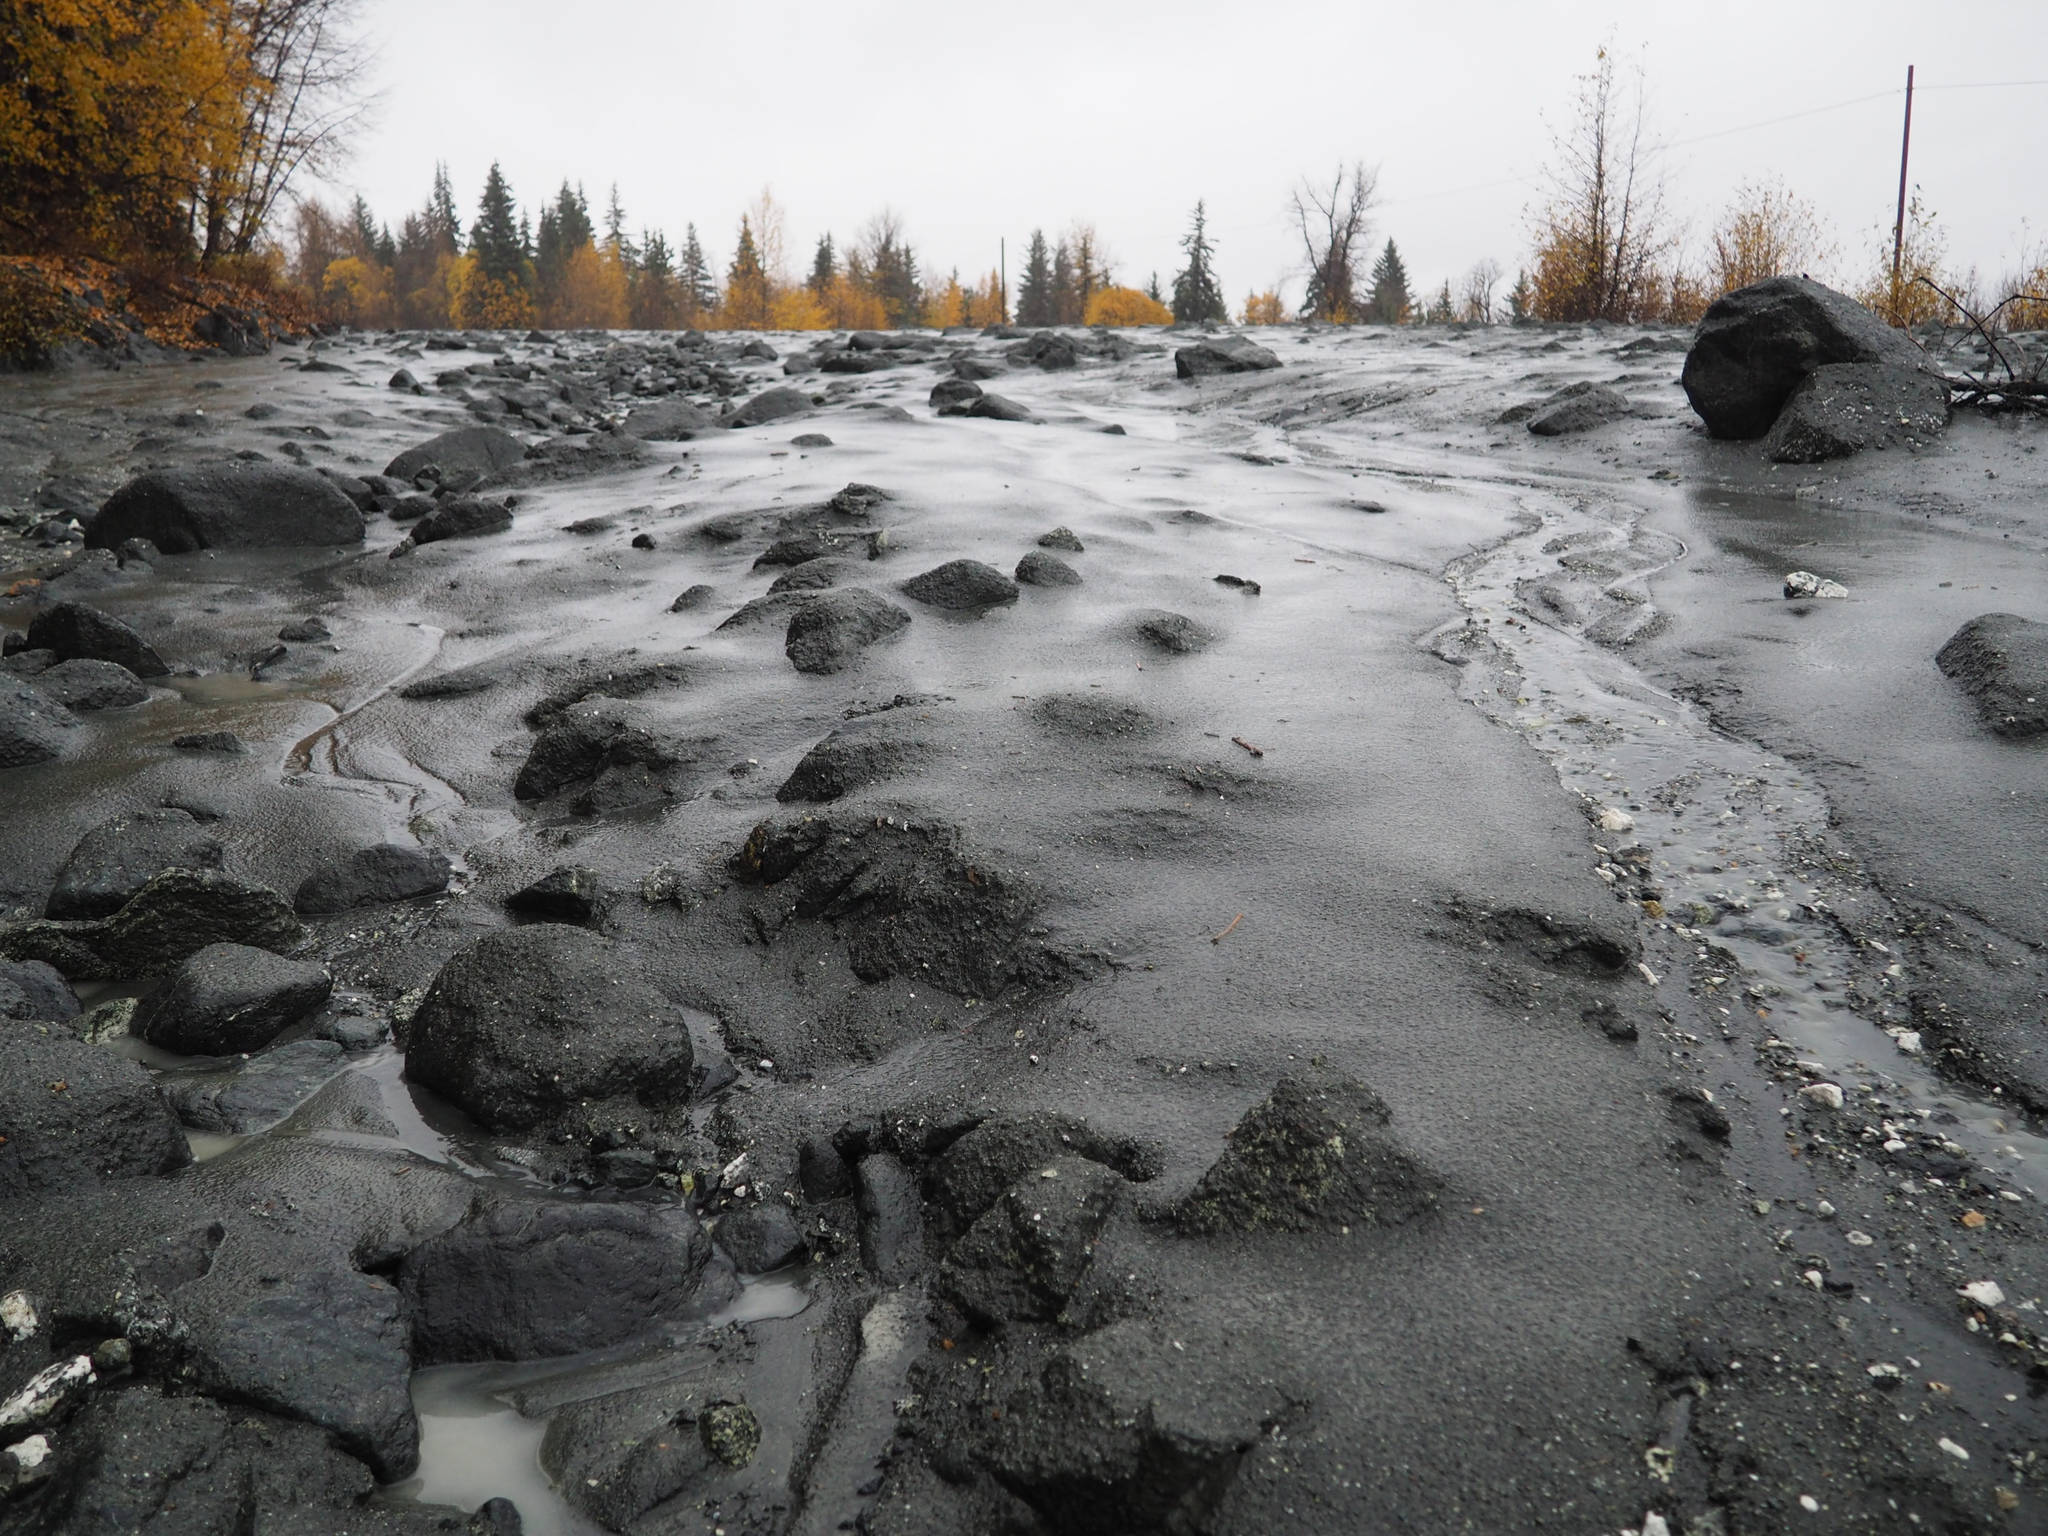 A mudslide covers the Haines Highway north of Klukwan on Sunday, Oct. 14, 2018 in this photo provided by the Alaska Department of Transportation and Public Facilities. The first significant storm of the fall brought heavy rain that triggered mudslides that blocked the highway for several hours. The highway reopened before Monday. (Lynette Campbell | Courtesy photo)